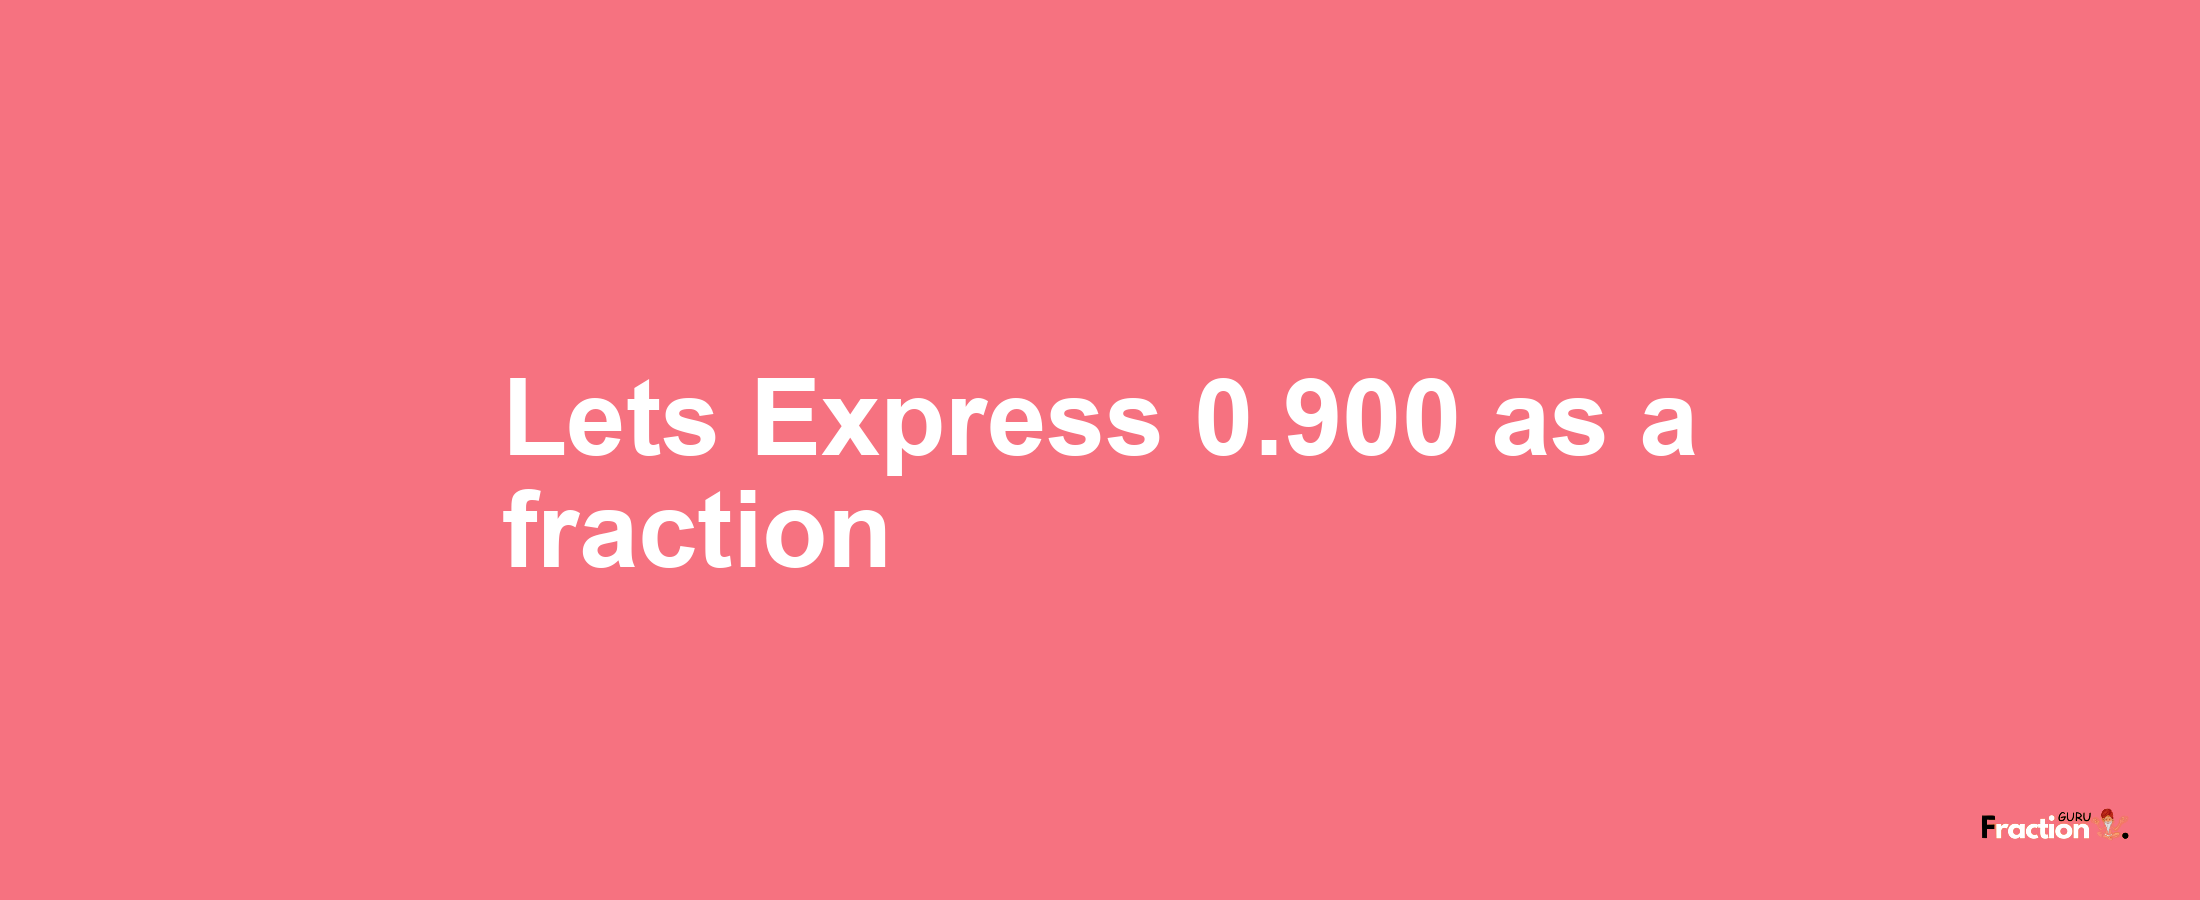 Lets Express 0.900 as afraction